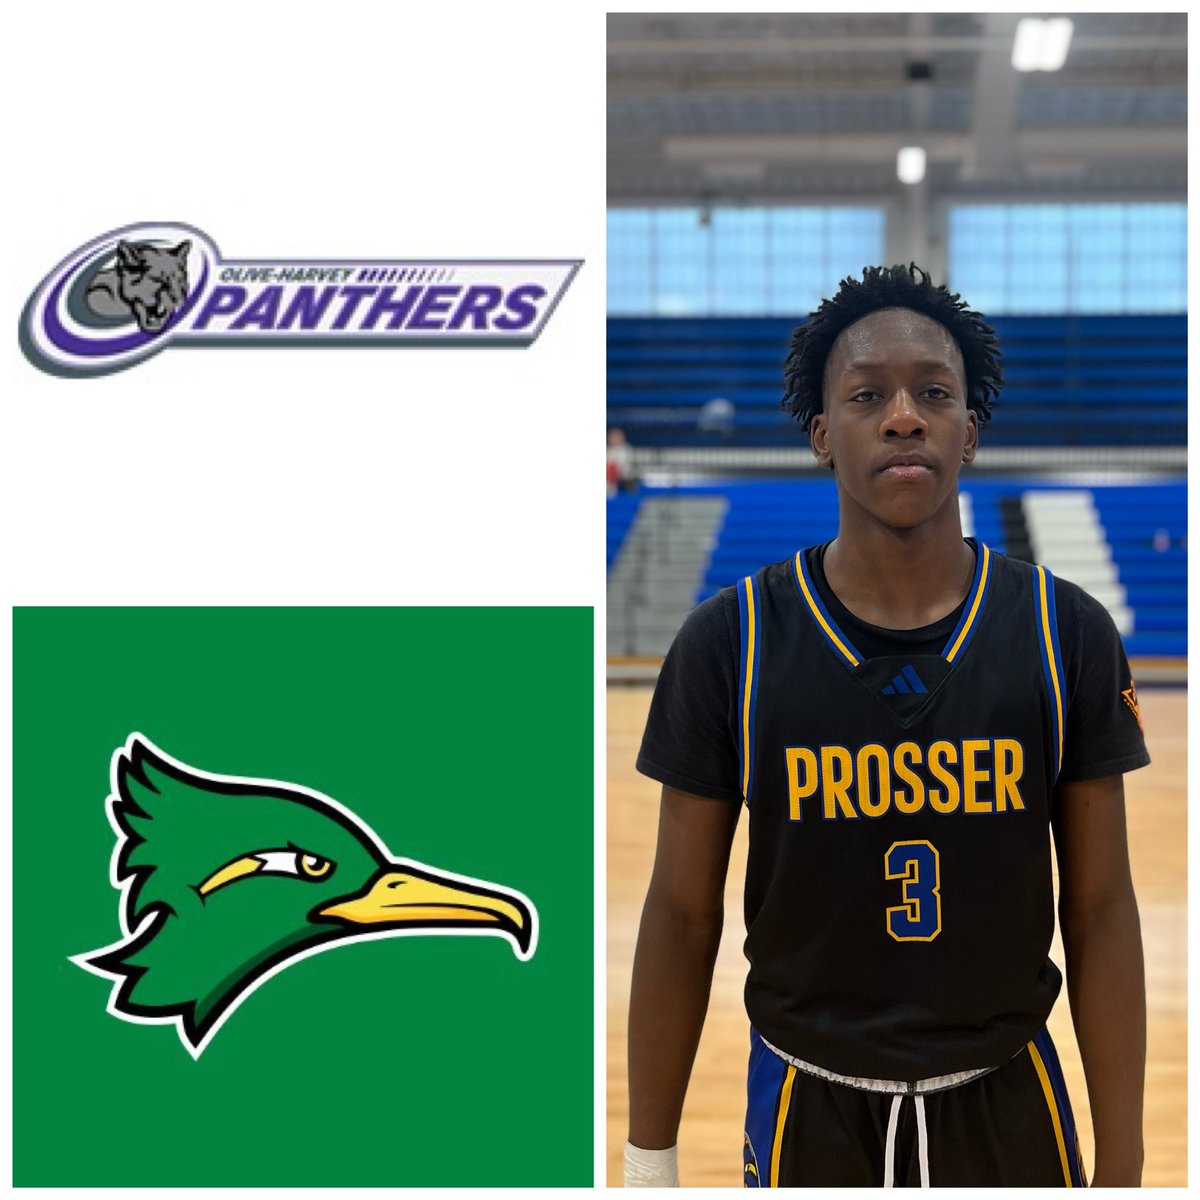 Prosser ‘24 G Dwayne Flowers recently picked up two offers: Southwestern Michigan and Olive Harvey. @XposureRuns @tdc200 @CoachTreal2